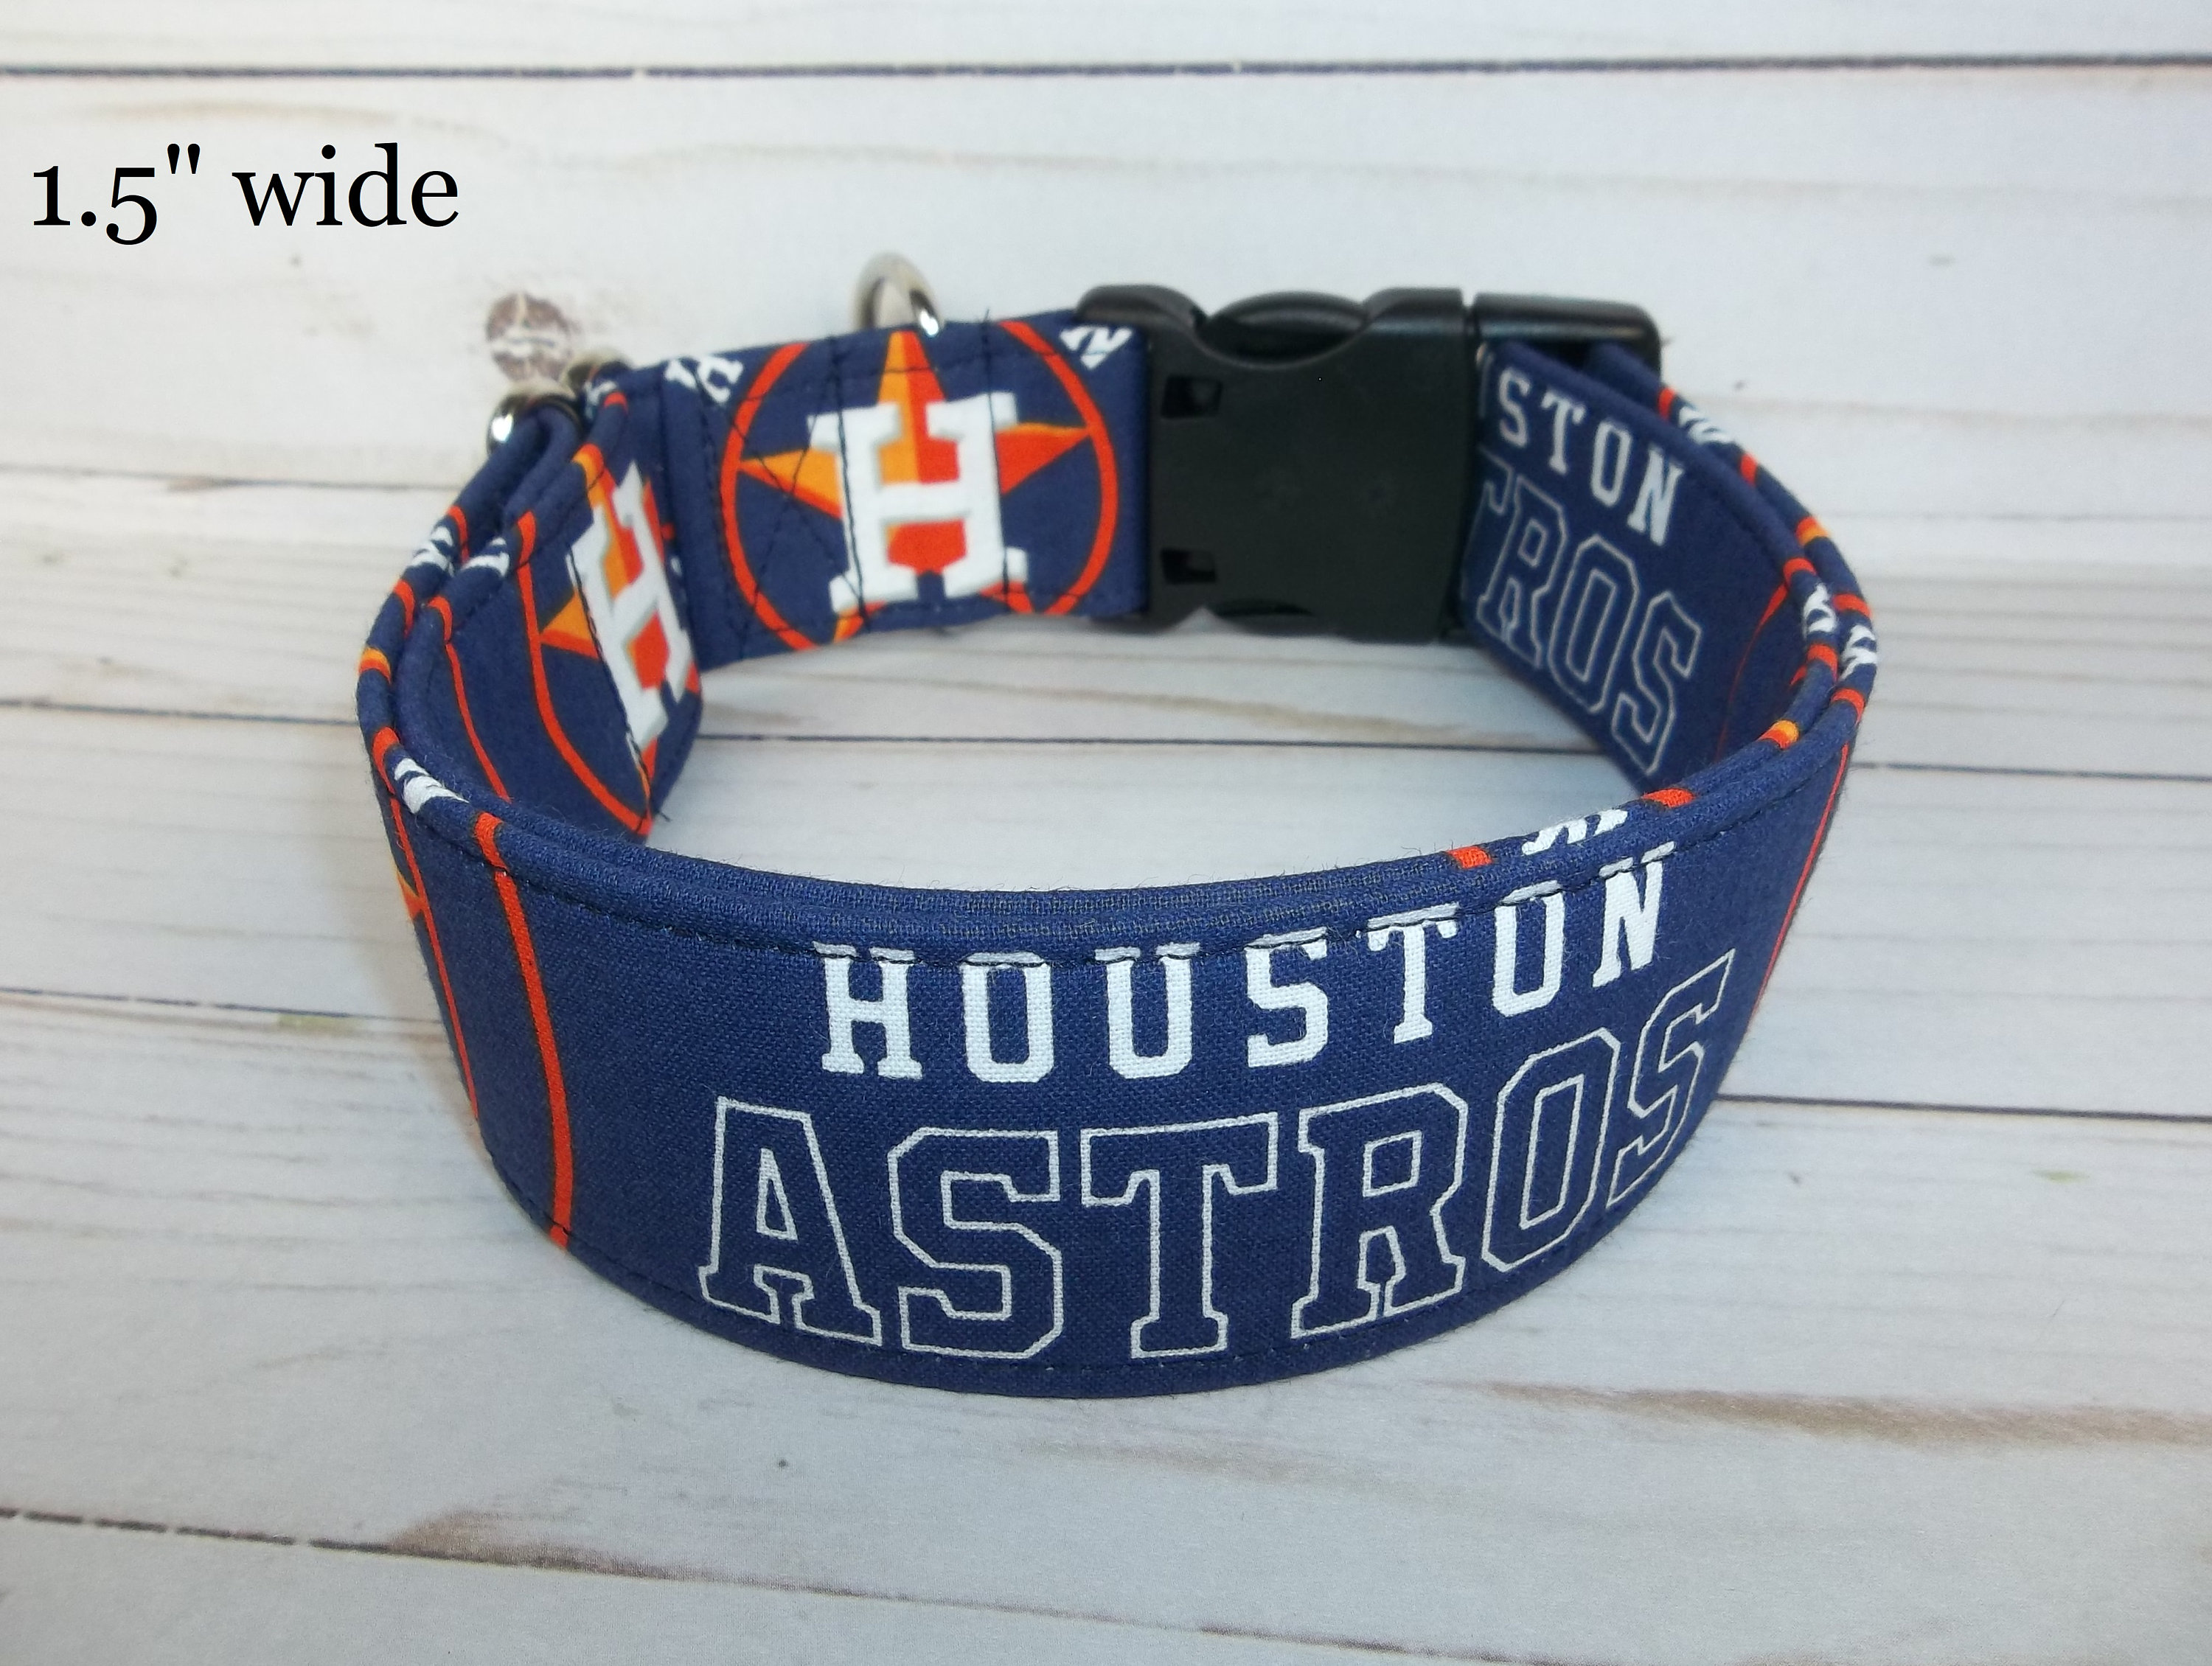  Pets First MLB Houston Astros Reversible T-Shirt,Medium for  Dogs & Cats. A Pet Shirt with The Team Logo That Comes with 2 Designs;  Stripe Tee Shirt on one Side,Team Color,AST-4158-MD 